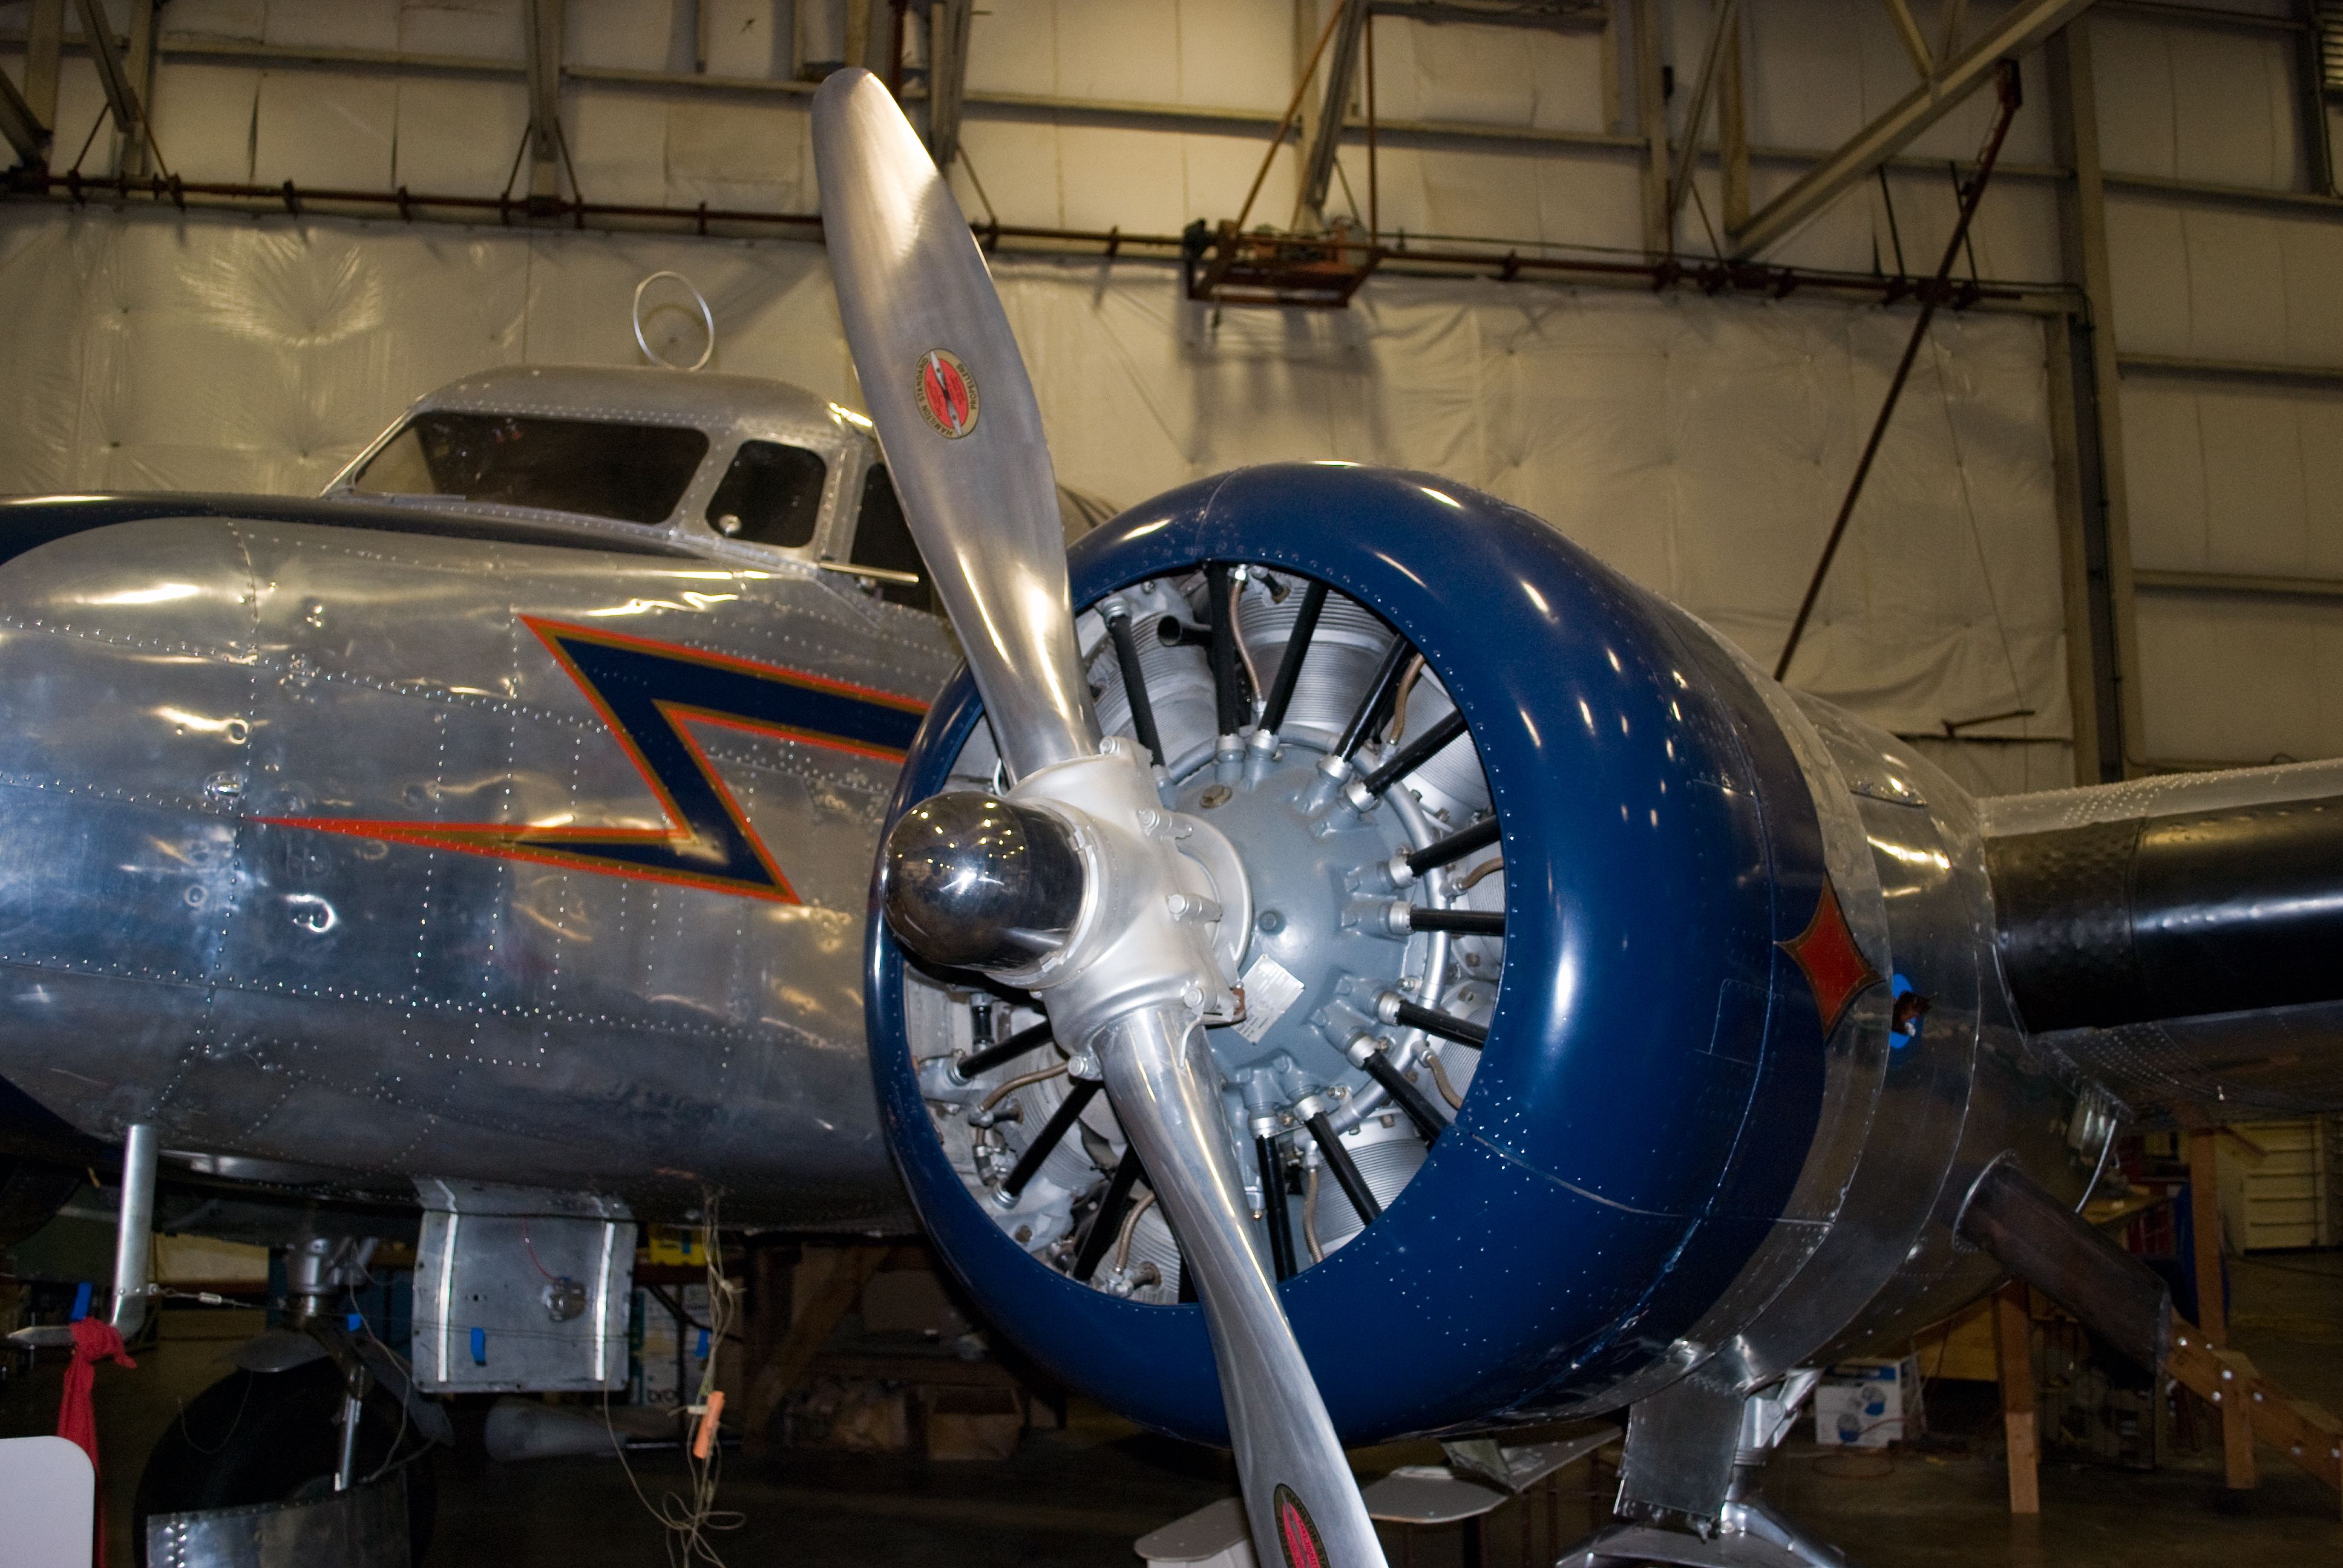 A Lockheed 10A Electra on display in the New England Air Museum.